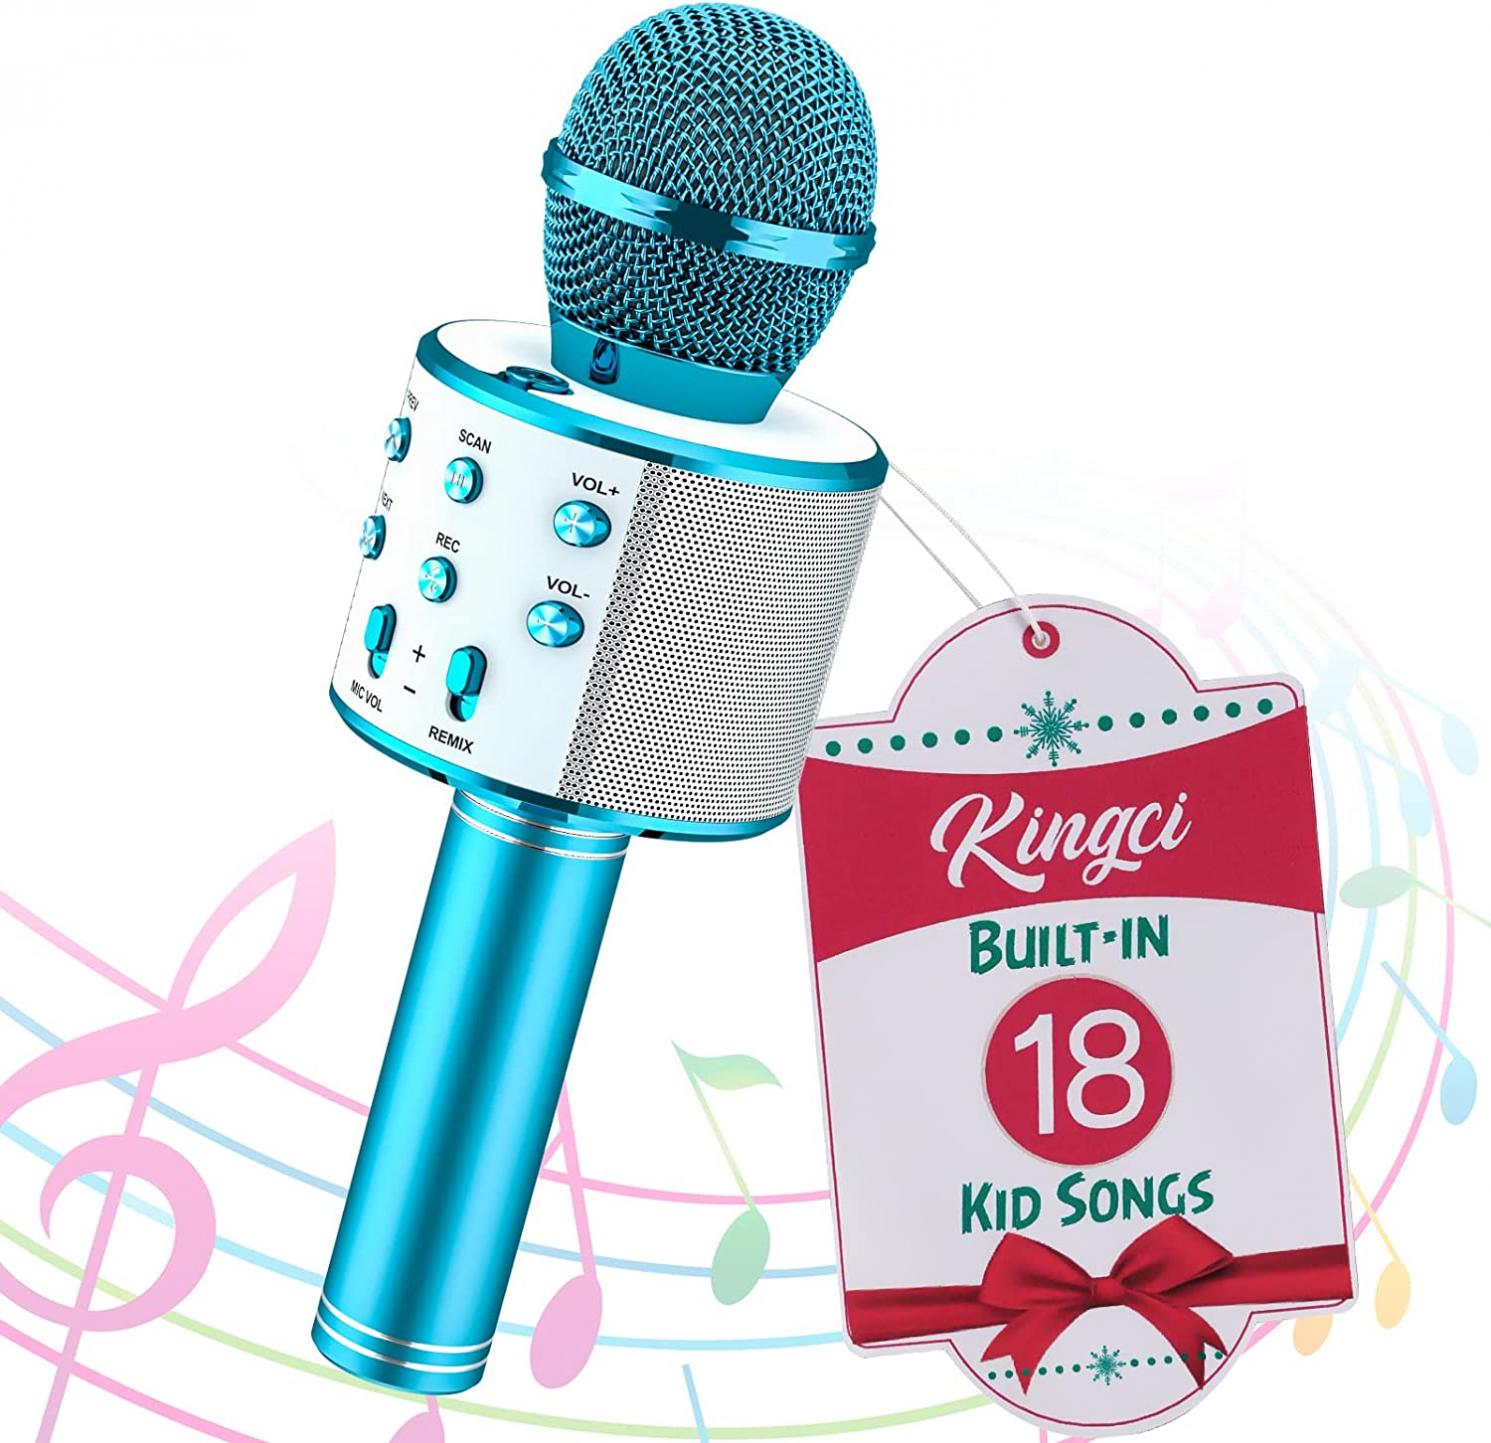 Kingci Kids Karaoke Microphone, 18 Pre-Loaded Nursery Rhymes Gifts for Girls Boys, Christmas Birthday Gift for Kids Aldults,Toys for Girls and Boys Ages 3, 4, 5, 6, 7, 8, 9, 10, 12 Year Old